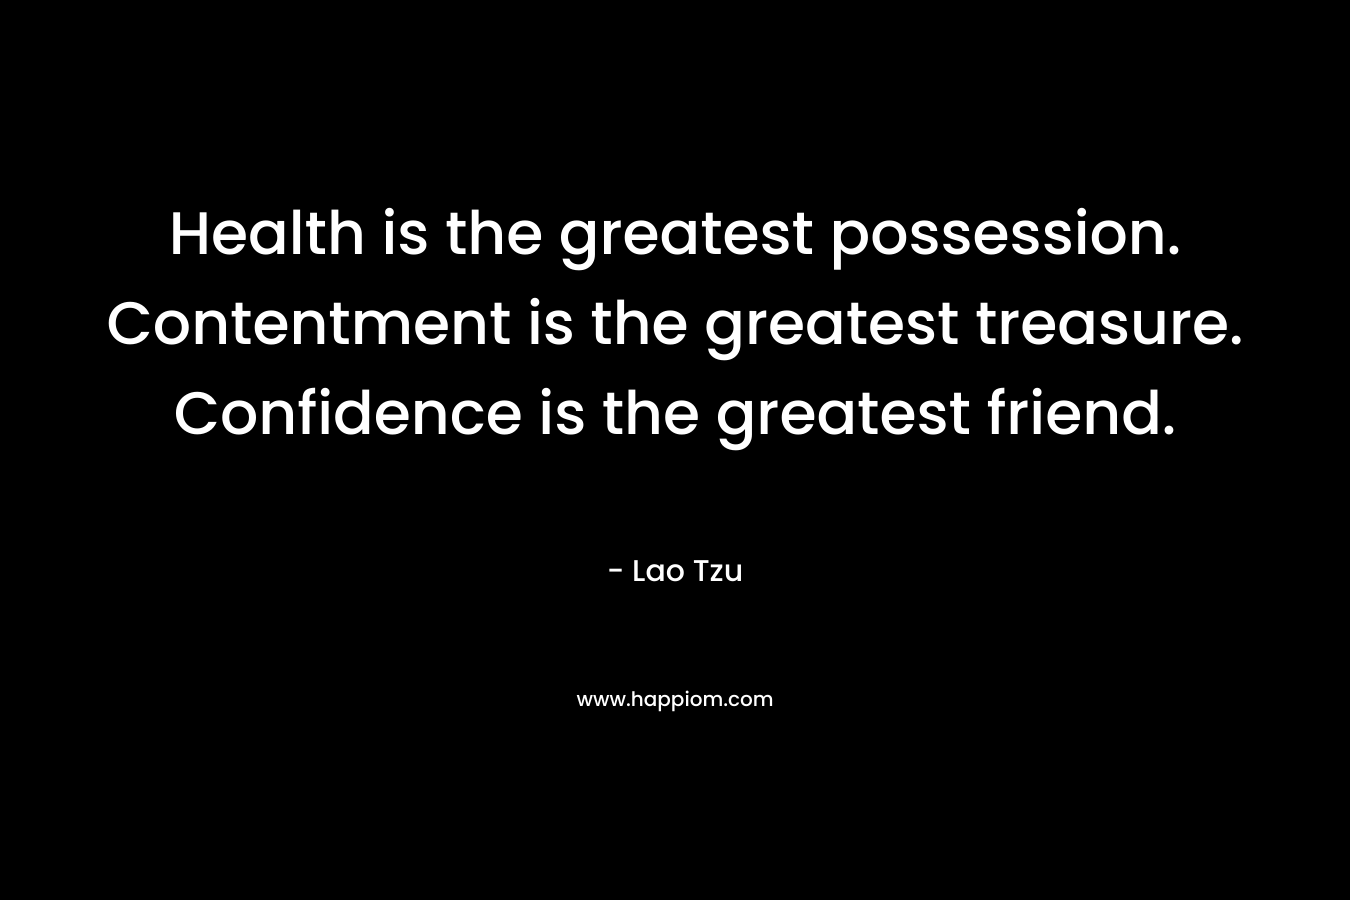 Health is the greatest possession. Contentment is the greatest treasure. Confidence is the greatest friend. – Lao Tzu